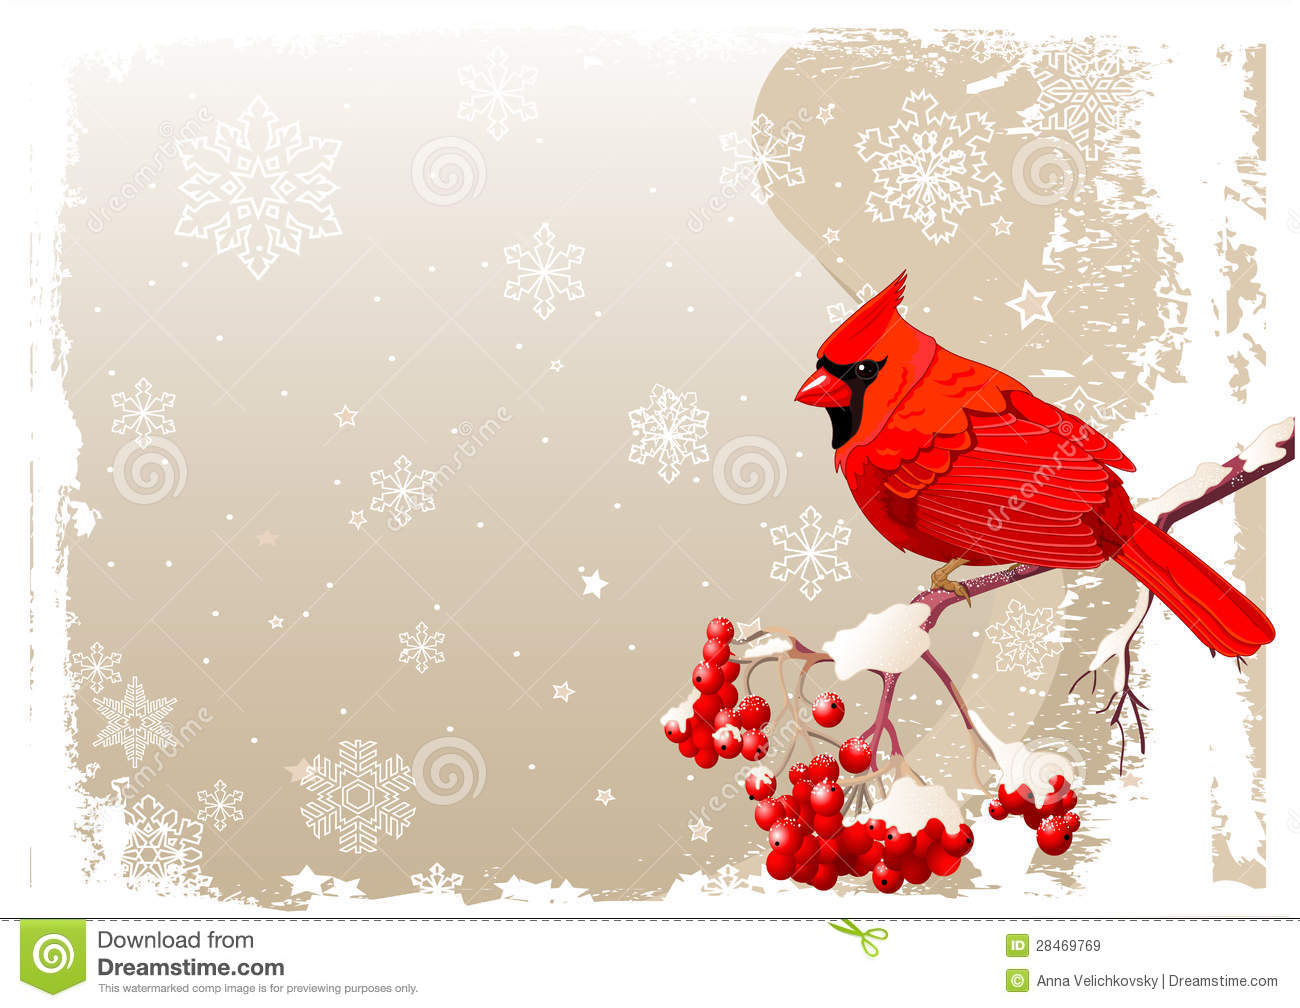 Red Cardinal Bird Background Royalty Free Stock Images   Image